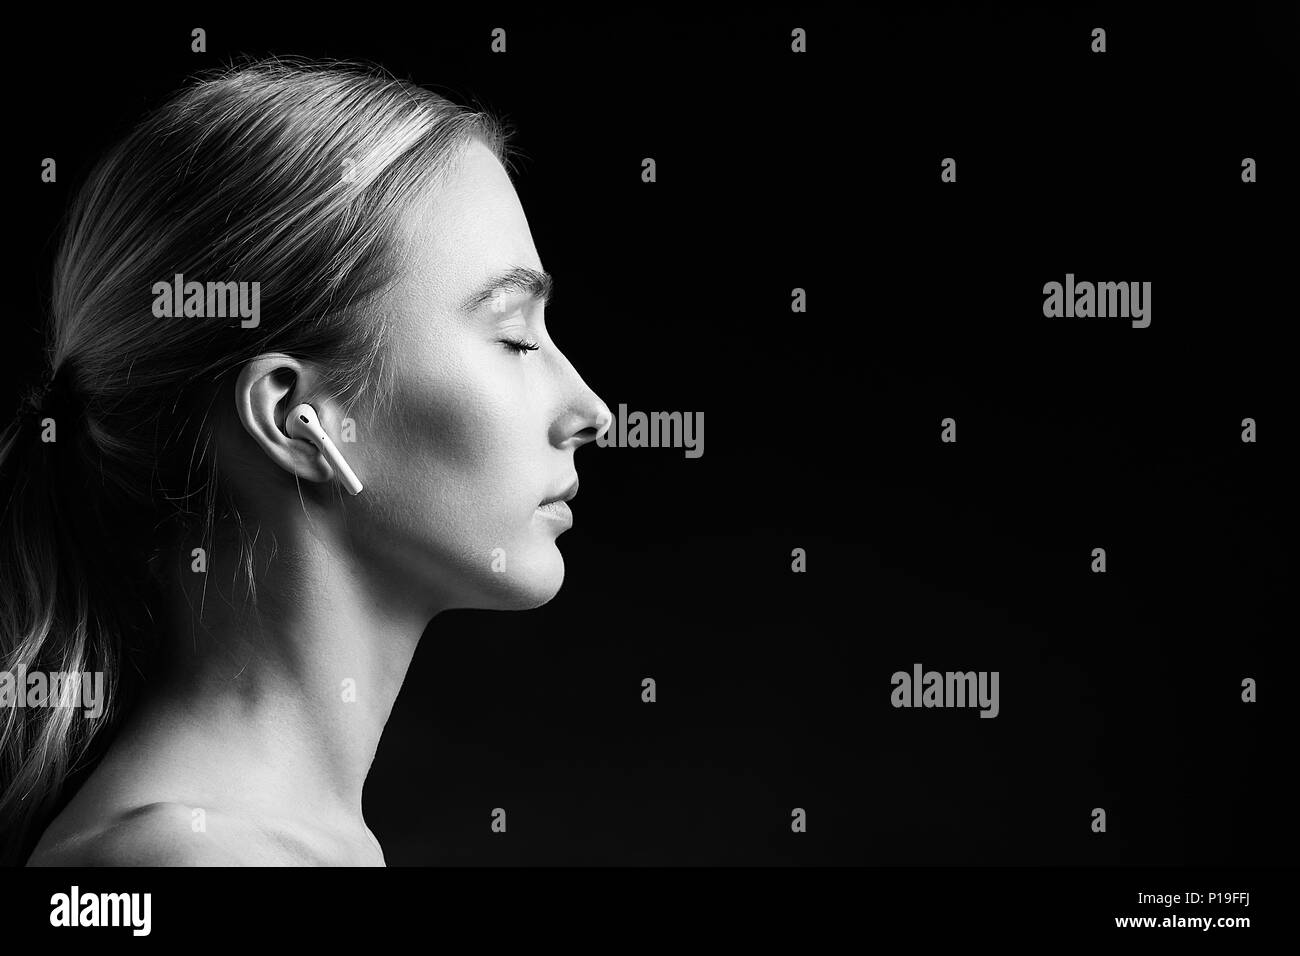 profile of blonde young woman with bluetooth earphones and closed eyes on black background, monochrome Stock Photo